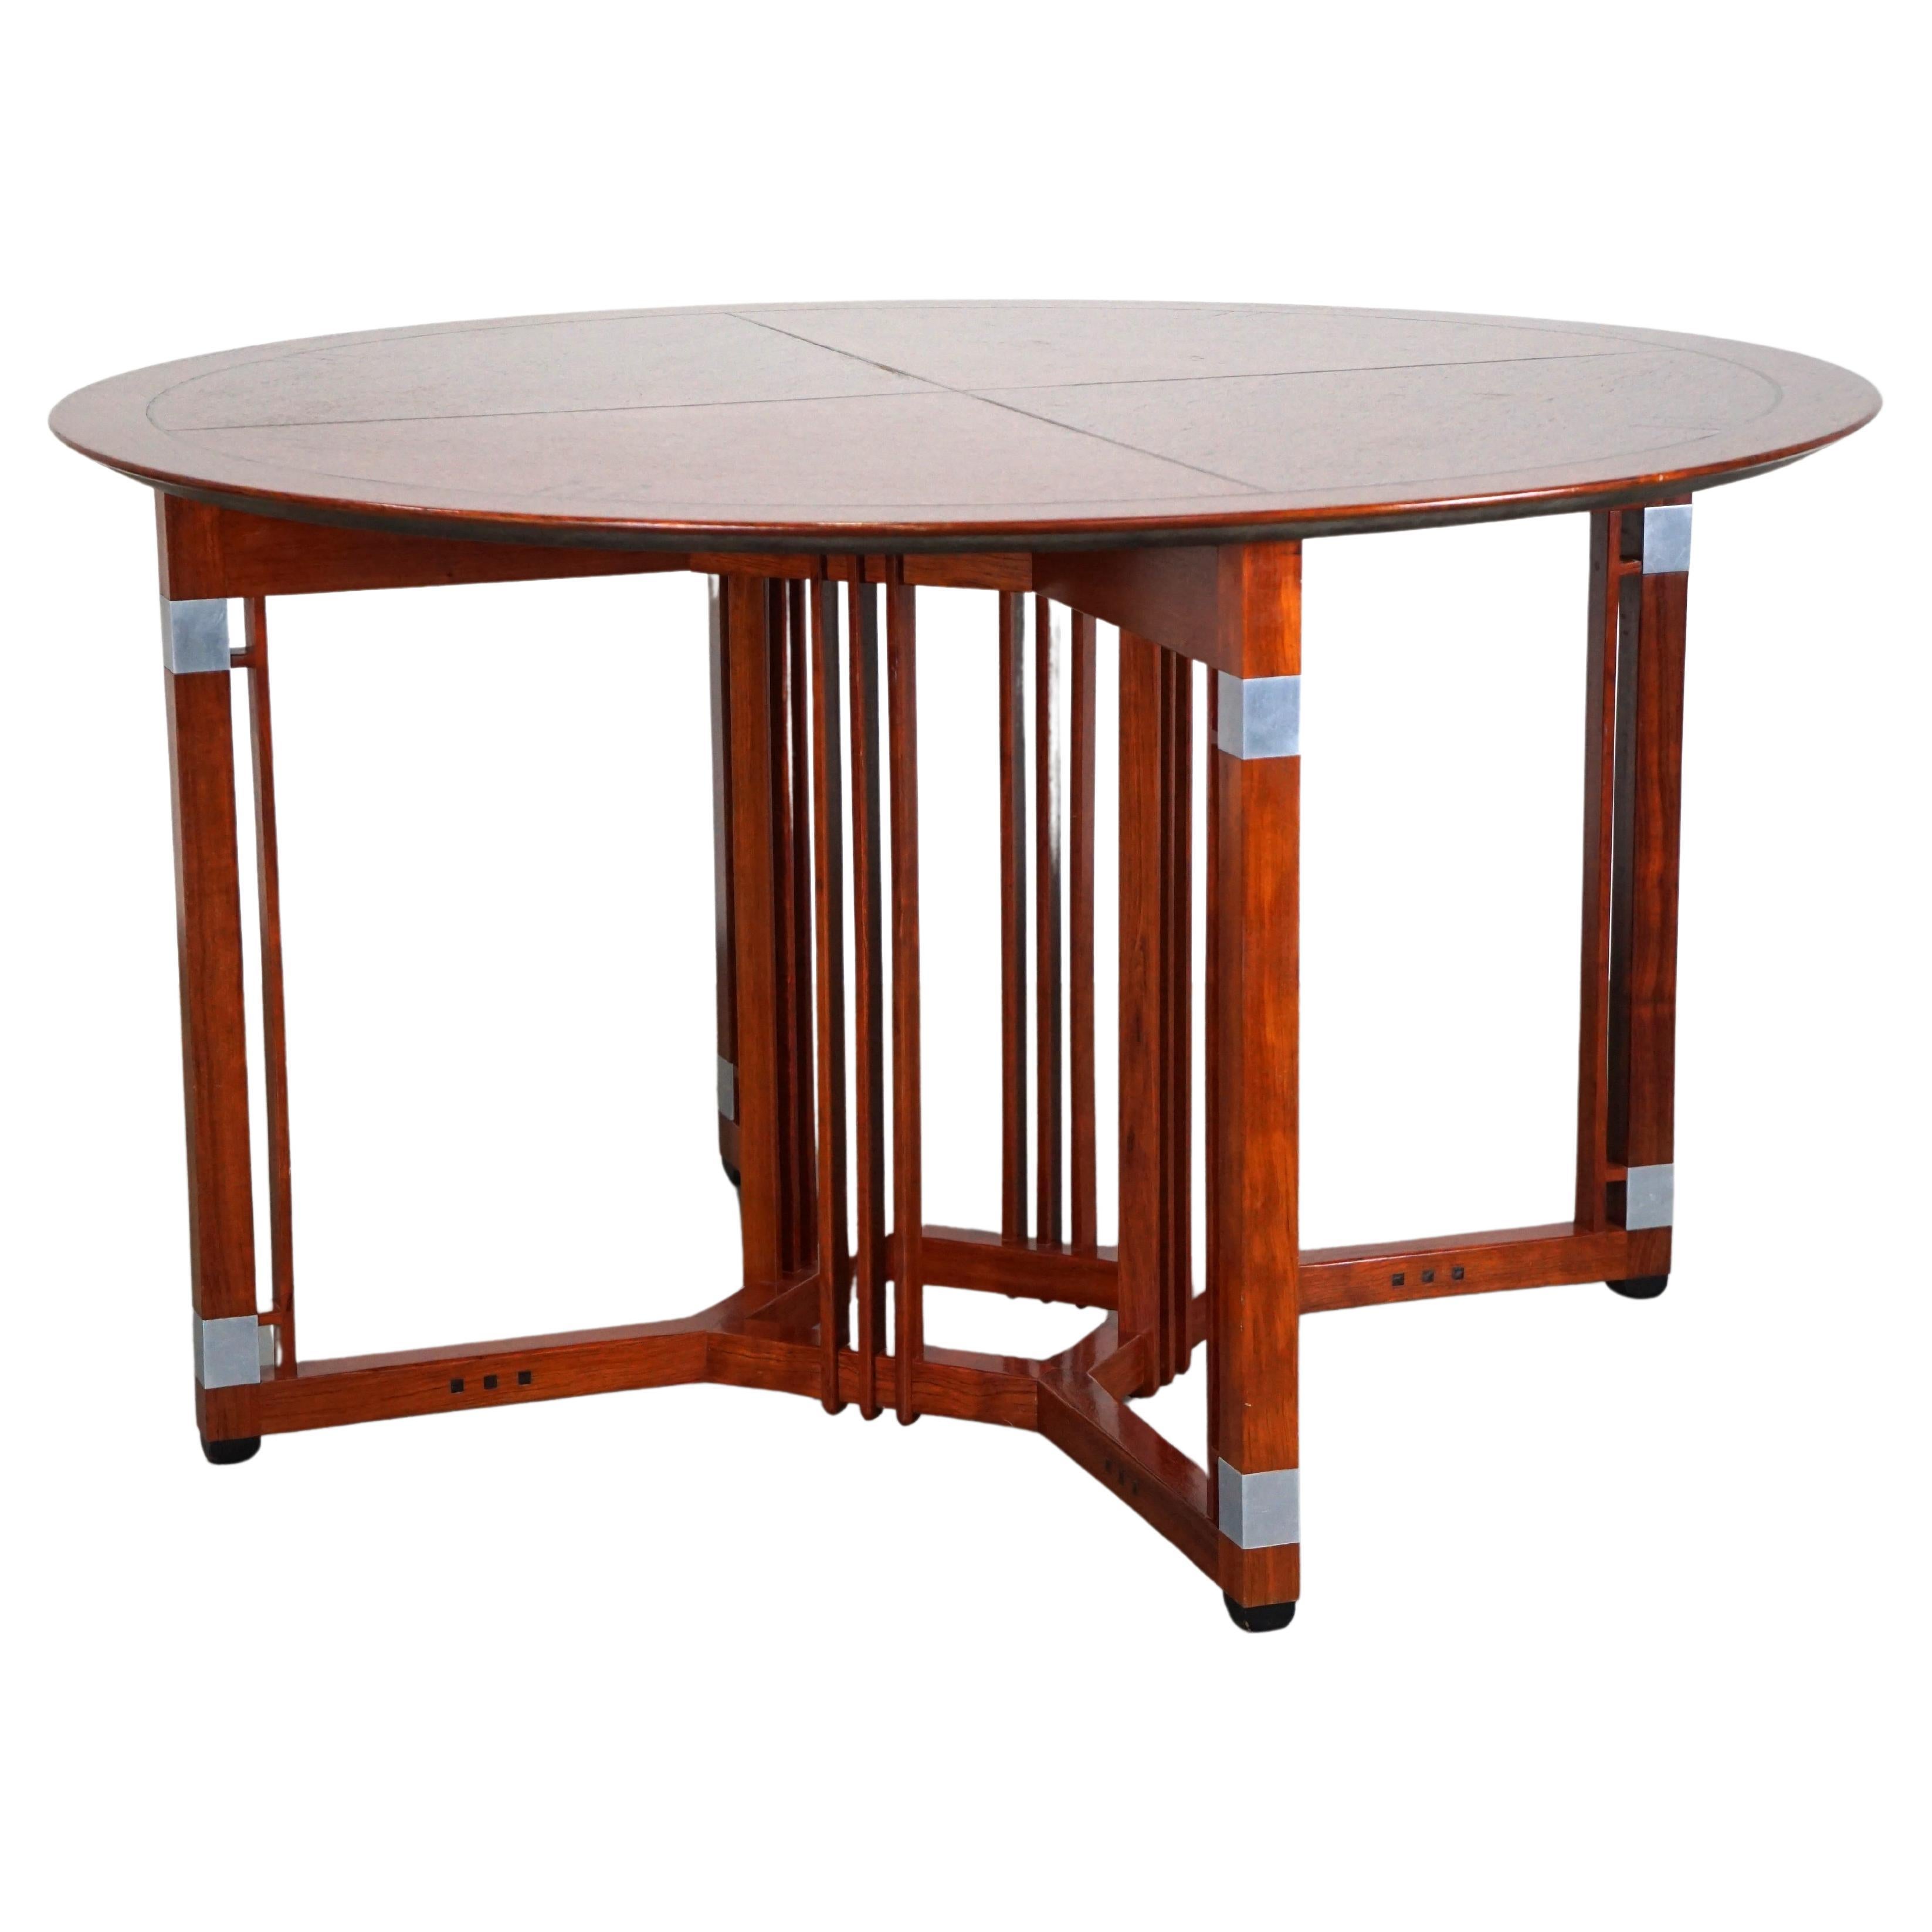 Beautiful round Schuitema Art Deco design dining table from the Decoforma series